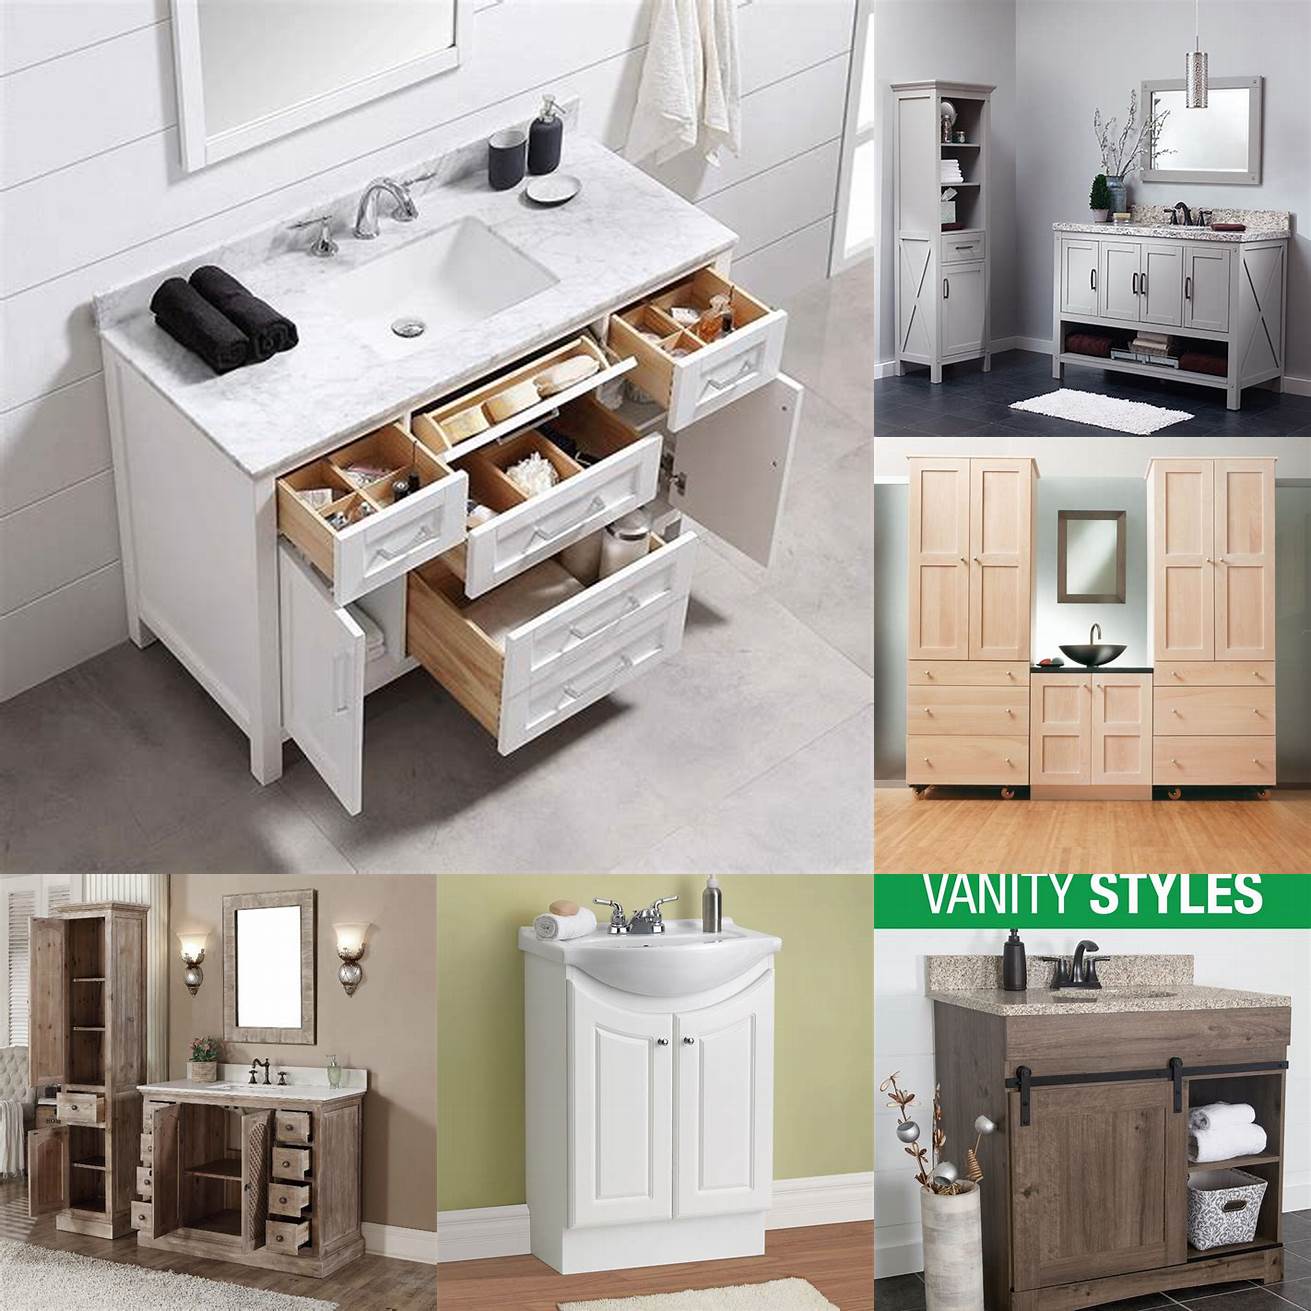 Spacious storage Menards vanities come with ample storage space to keep your bathroom essentials organized and easily accessible